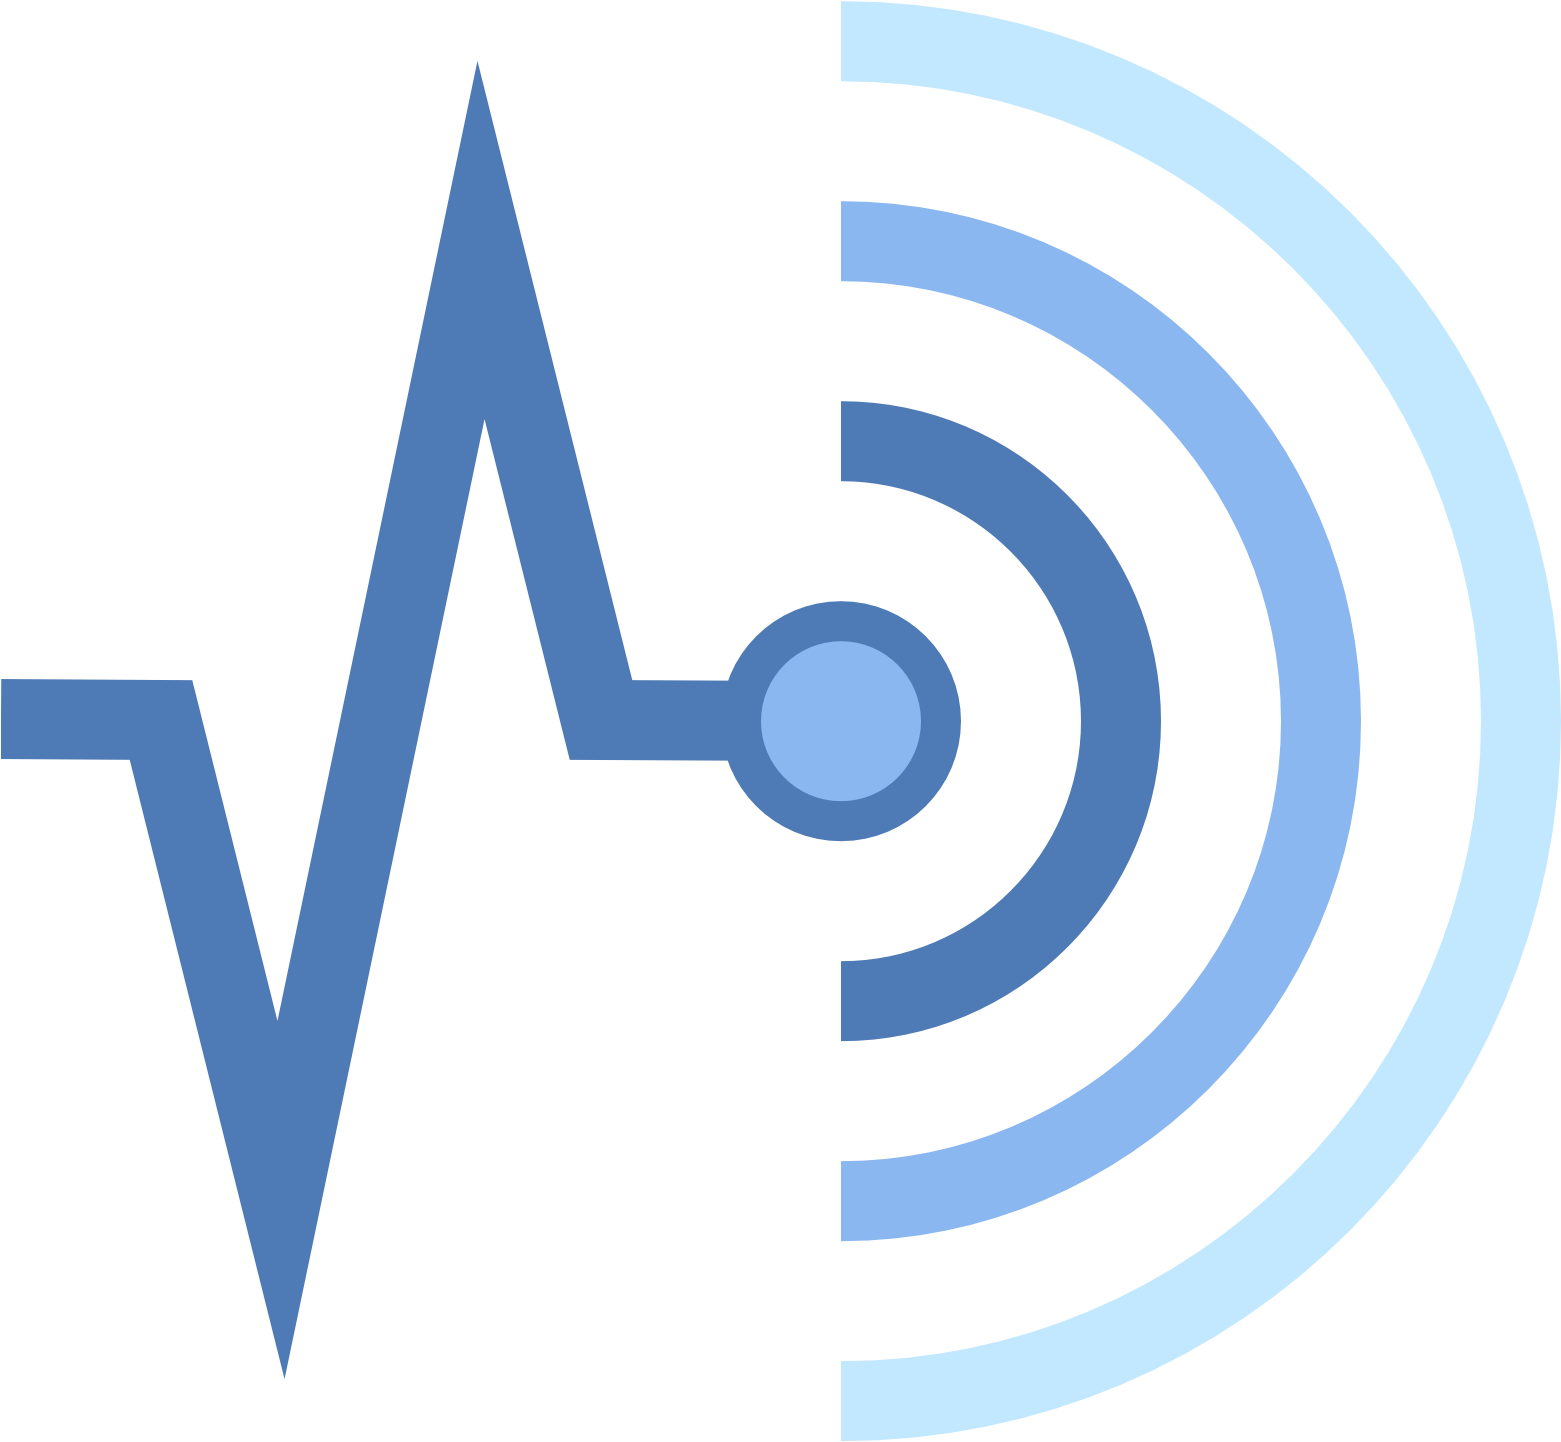 Wireless Τemperature & Ηumidity Monitoring Applications - Sensors Icon Png (1600x1600)